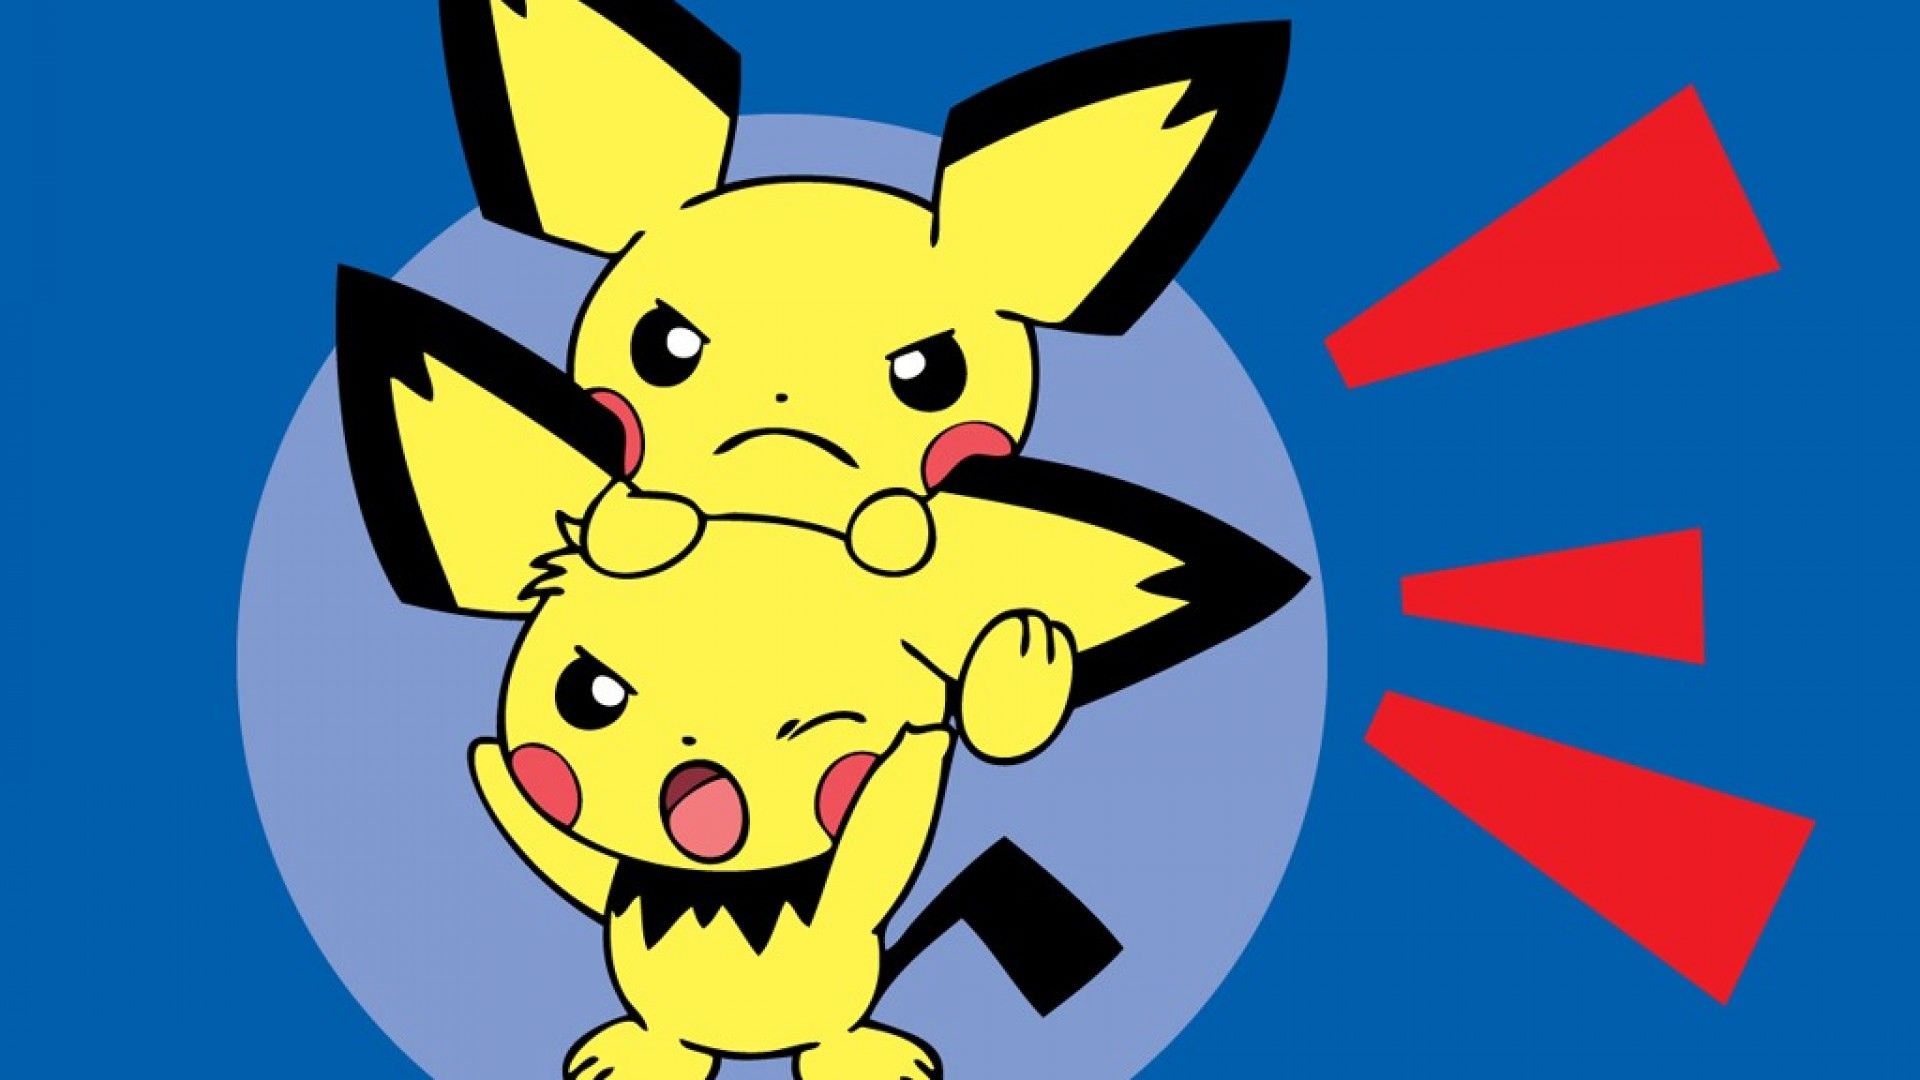 Pikachu and Pichu Wallpaper  eisoruss Kofi Shop  Kofi  Where  creators get support from fans through donations memberships shop sales  and more The original Buy Me a Coffee Page